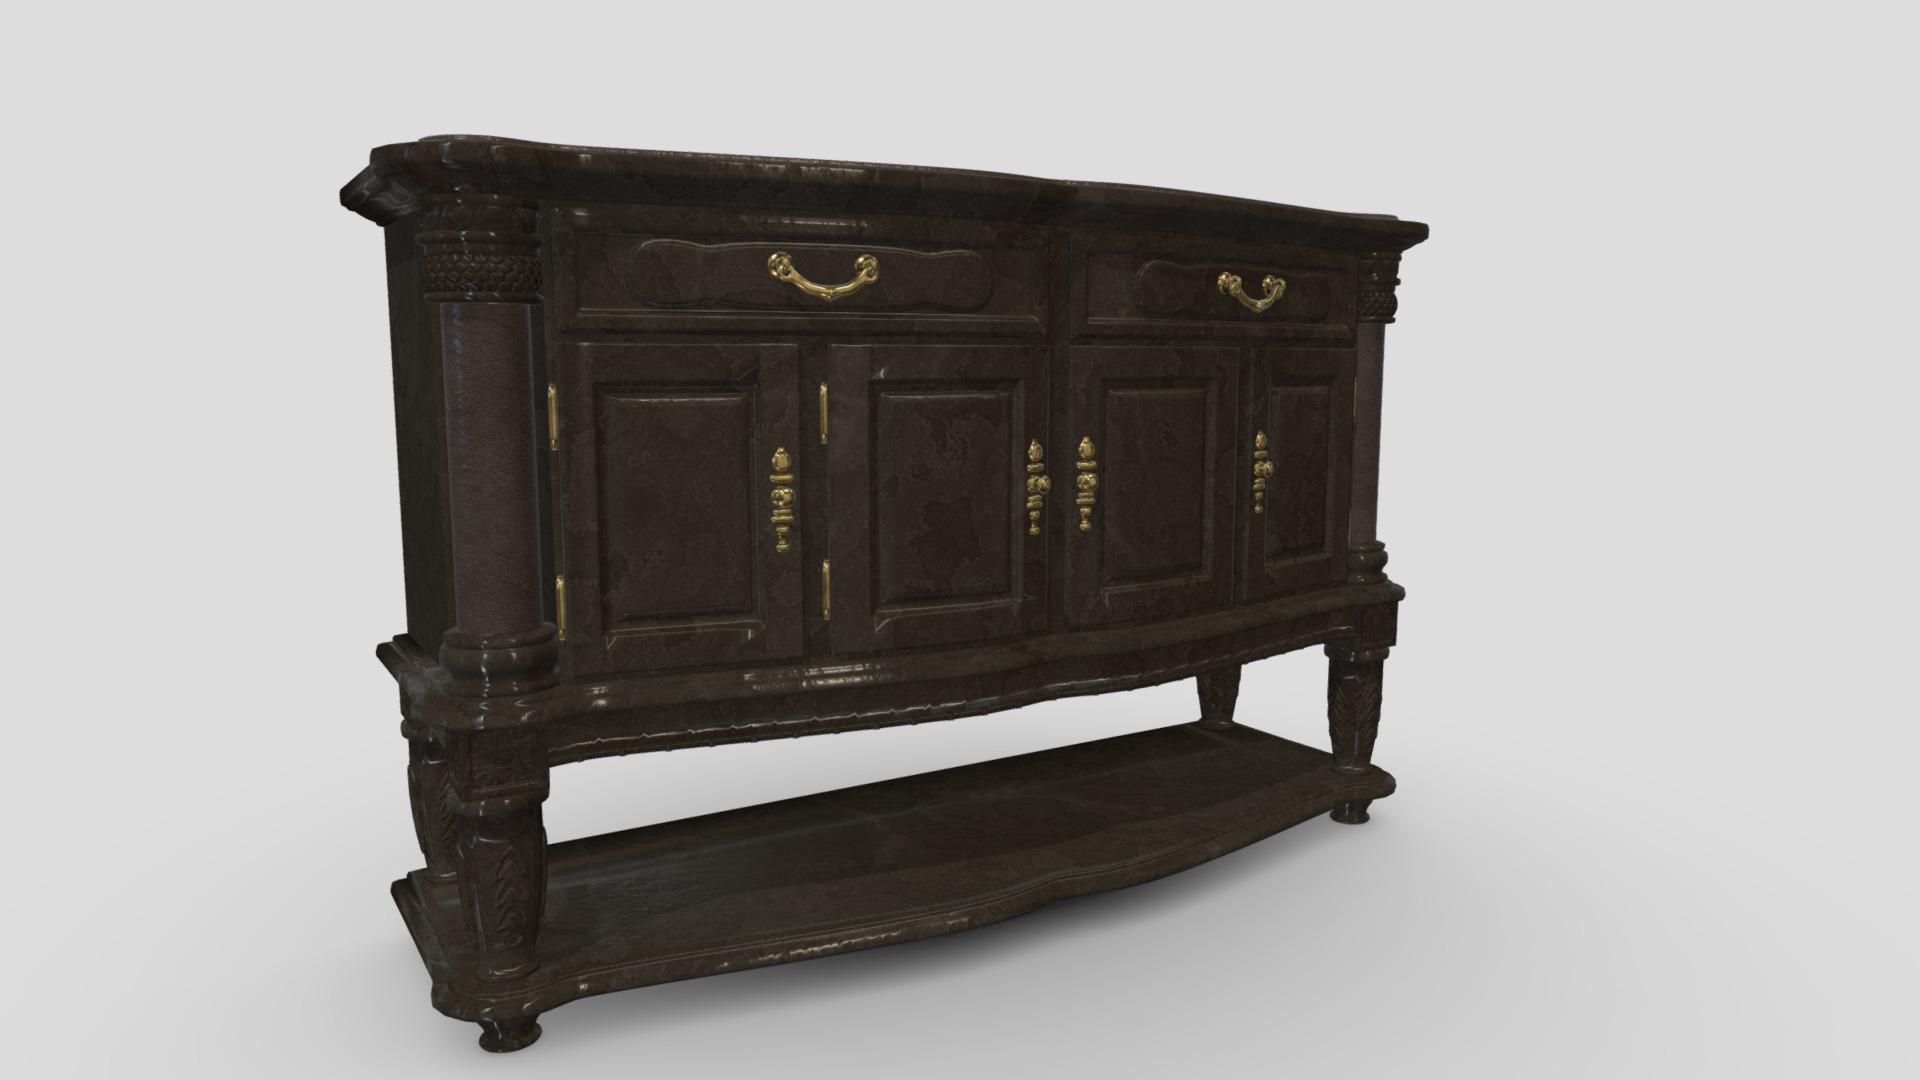 3D model Antique Cupboard  11 - This is a 3D model of the Antique Cupboard  11. The 3D model is about a wooden chest with a gold top.